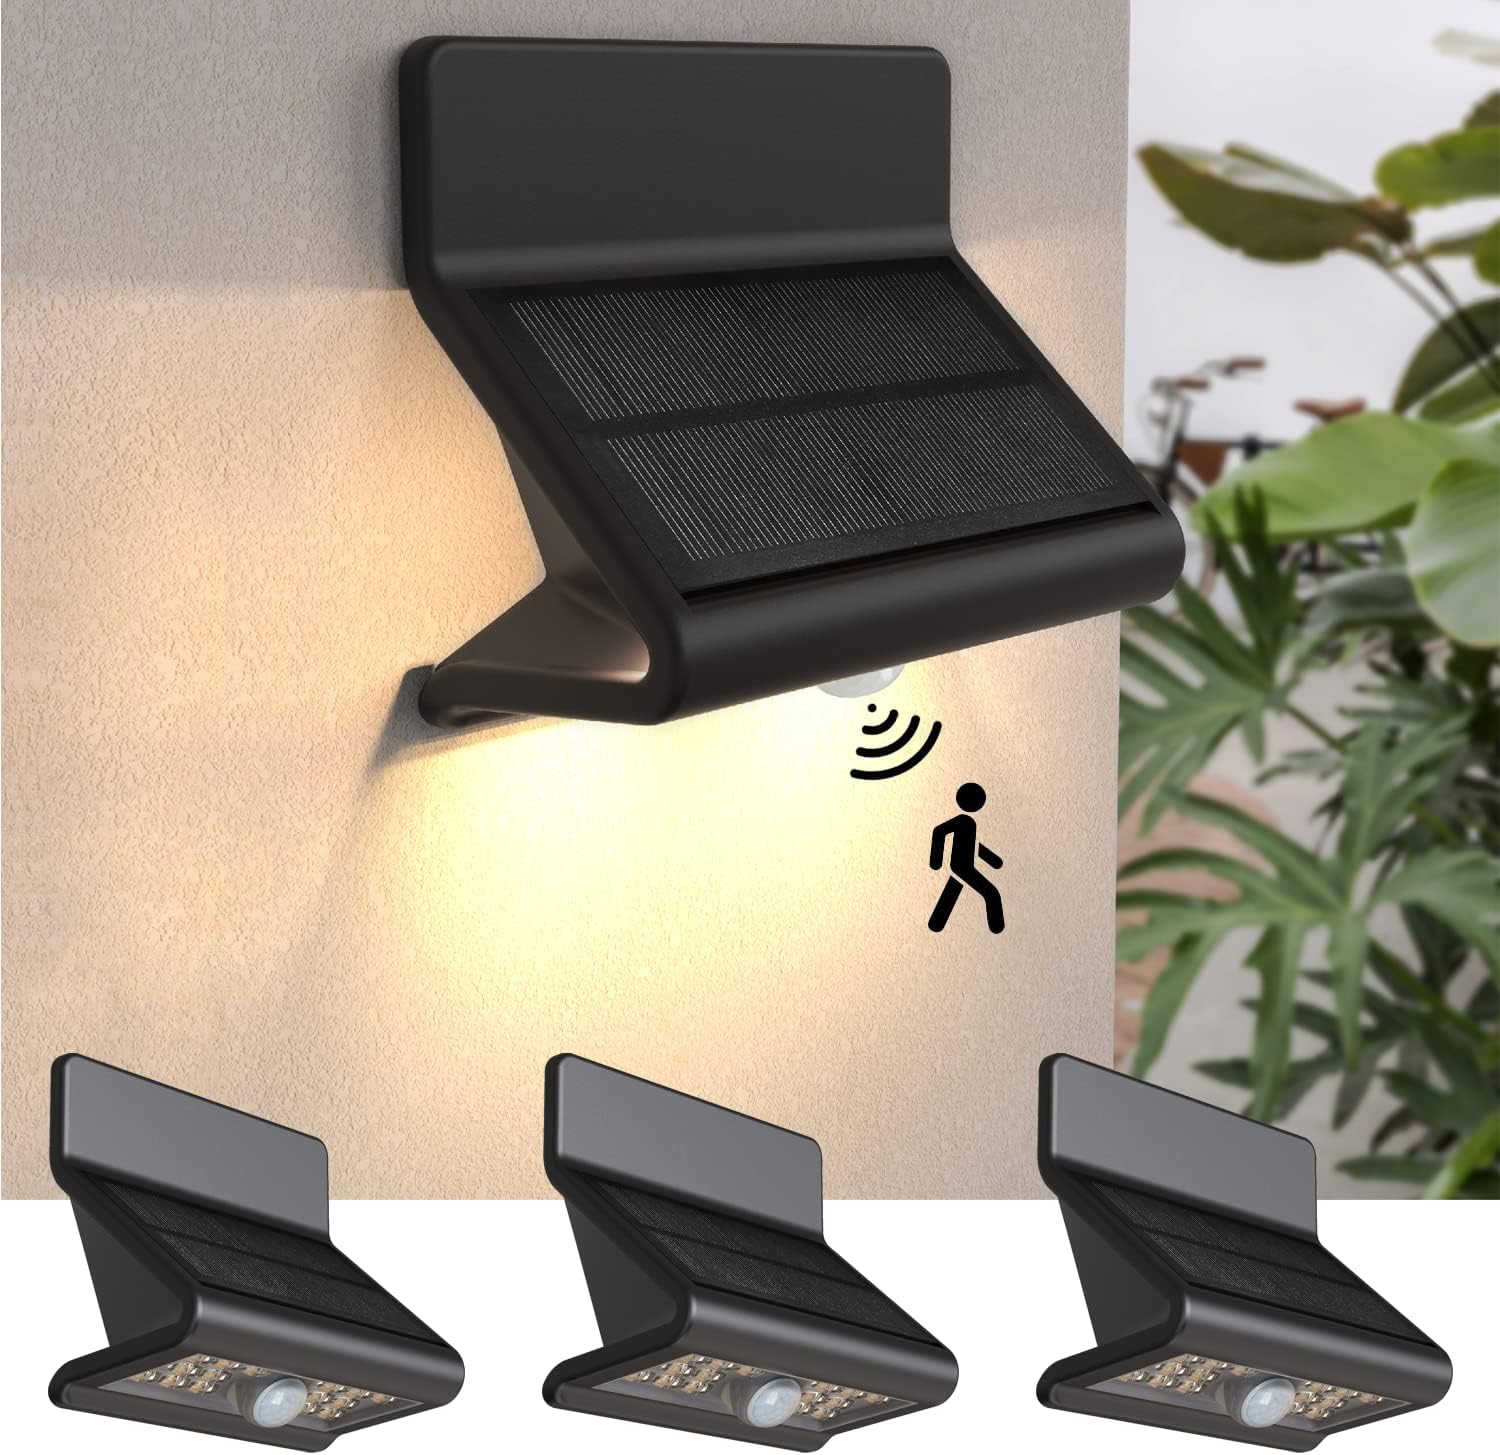 AURAXY LED Solar Motion Sensor Waterproof Outdoor Security Flood Lights, Battery Powered Outside Motion Activated Wall Light, Applied